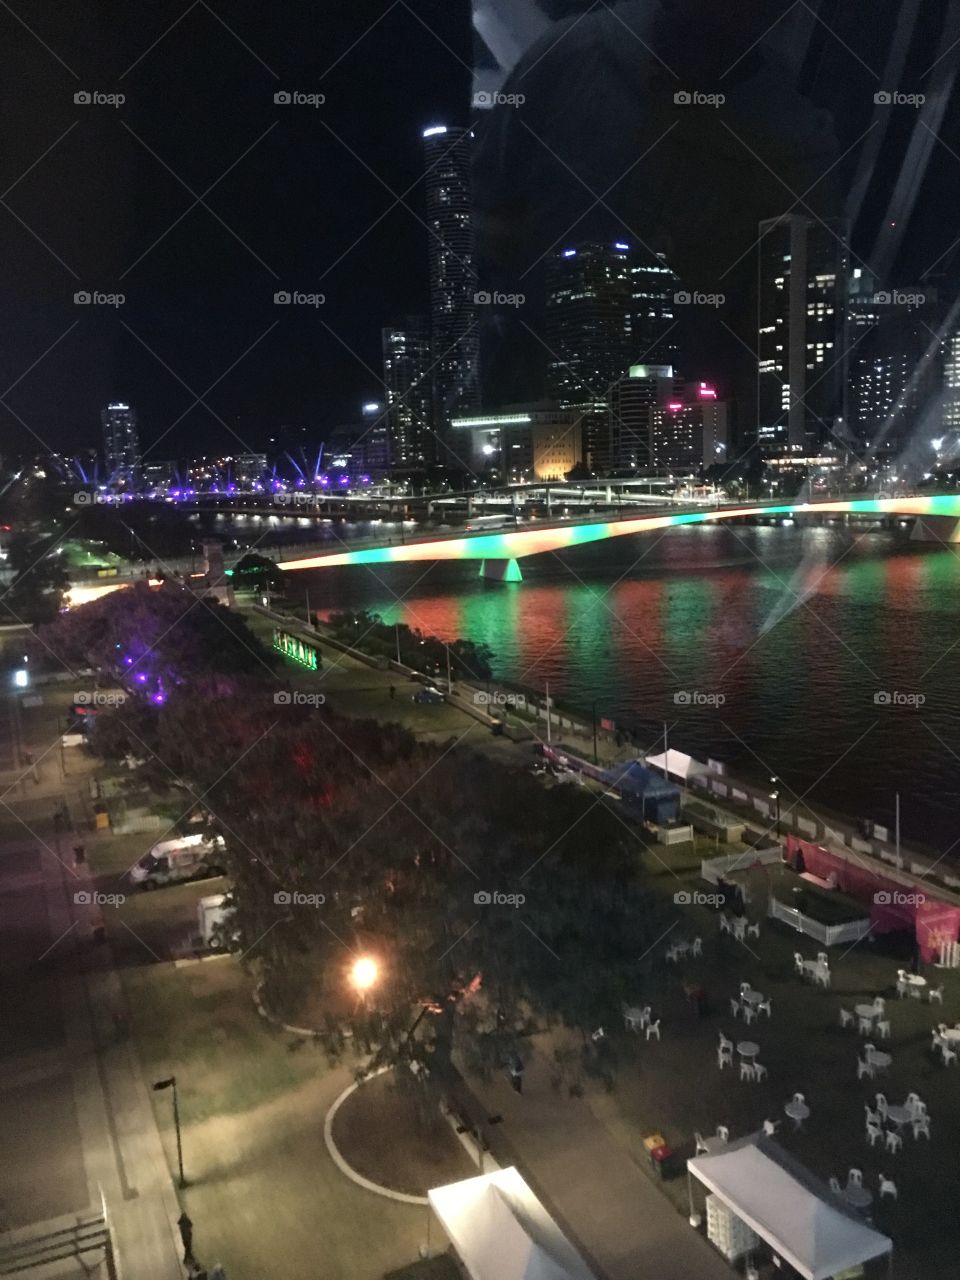 Feeling on top of the world! The Wheel of Brisbane once the vertigo has settled the experience is breathtaking. 